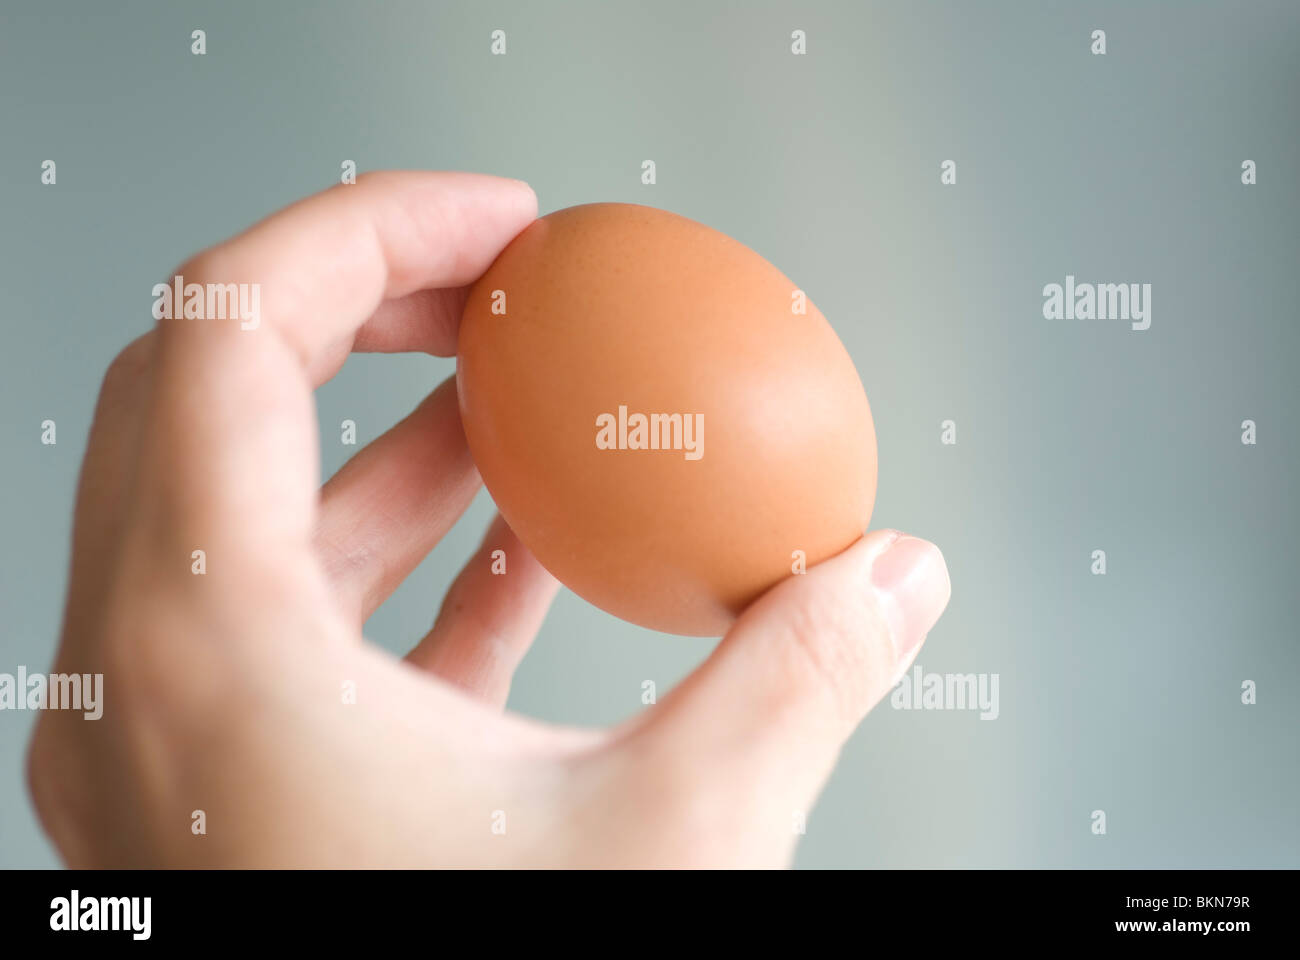 Woman holding a brown egg Stock Photo